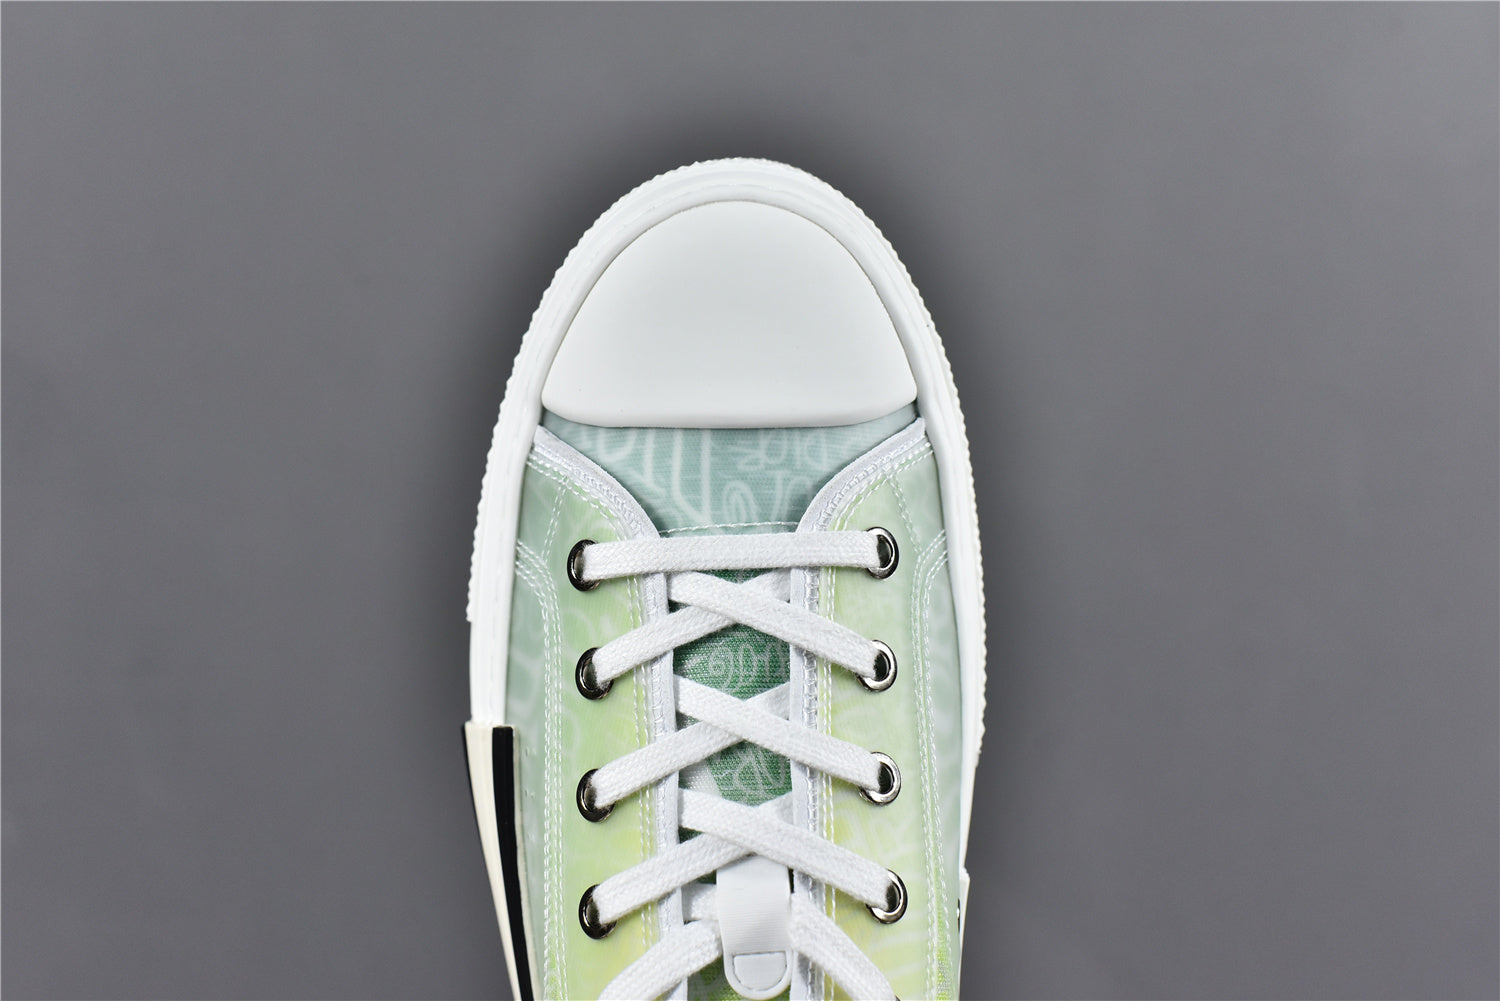 Dior B23 Low-Top 'Yellow and Green Canvas'